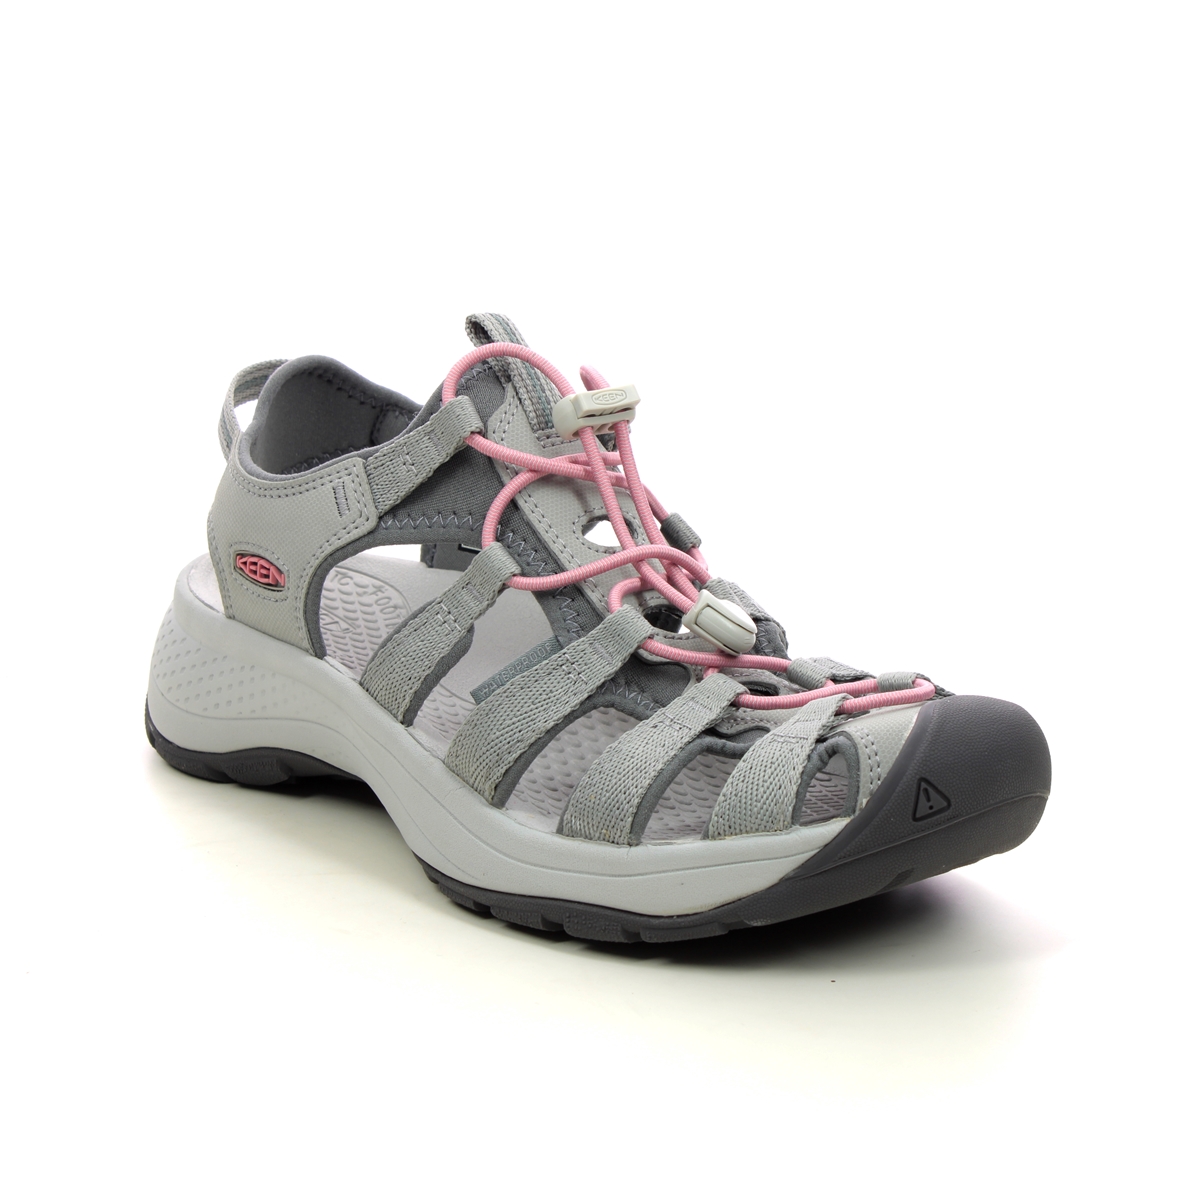 Keen Astoria West Light grey Womens Closed Toe Sandals 1023589- in a Plain Man-made in Size 7